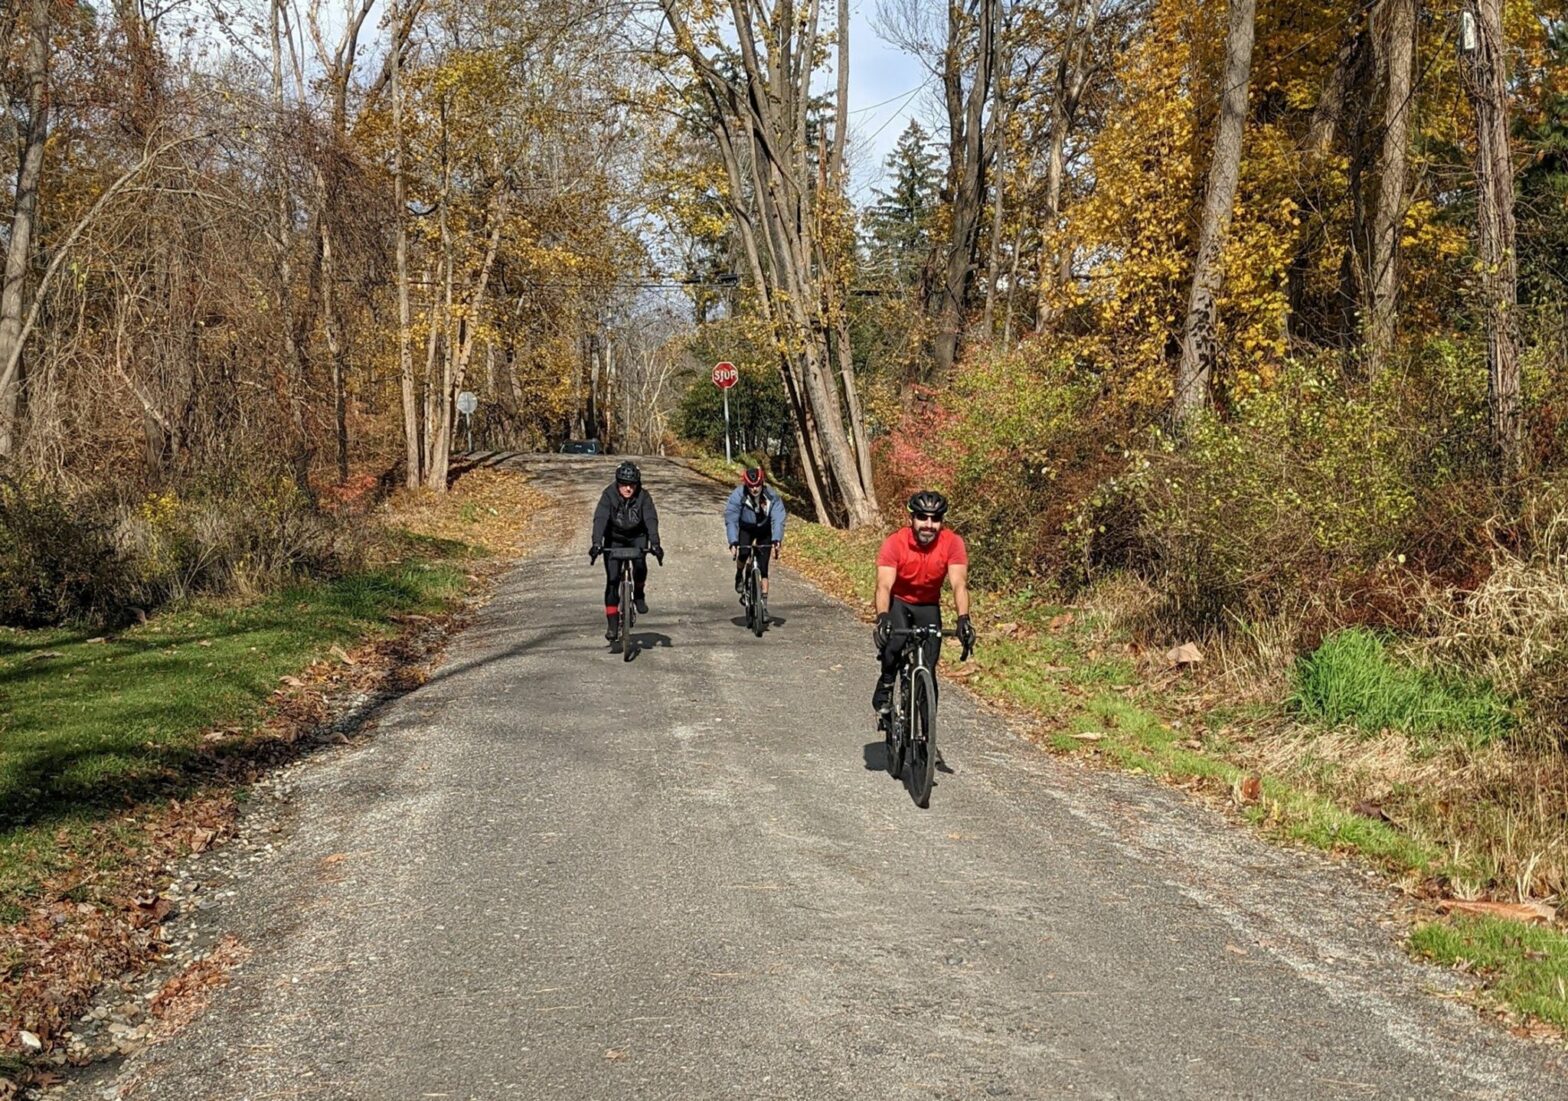 3 GrNY gravel bikes on a dirt road